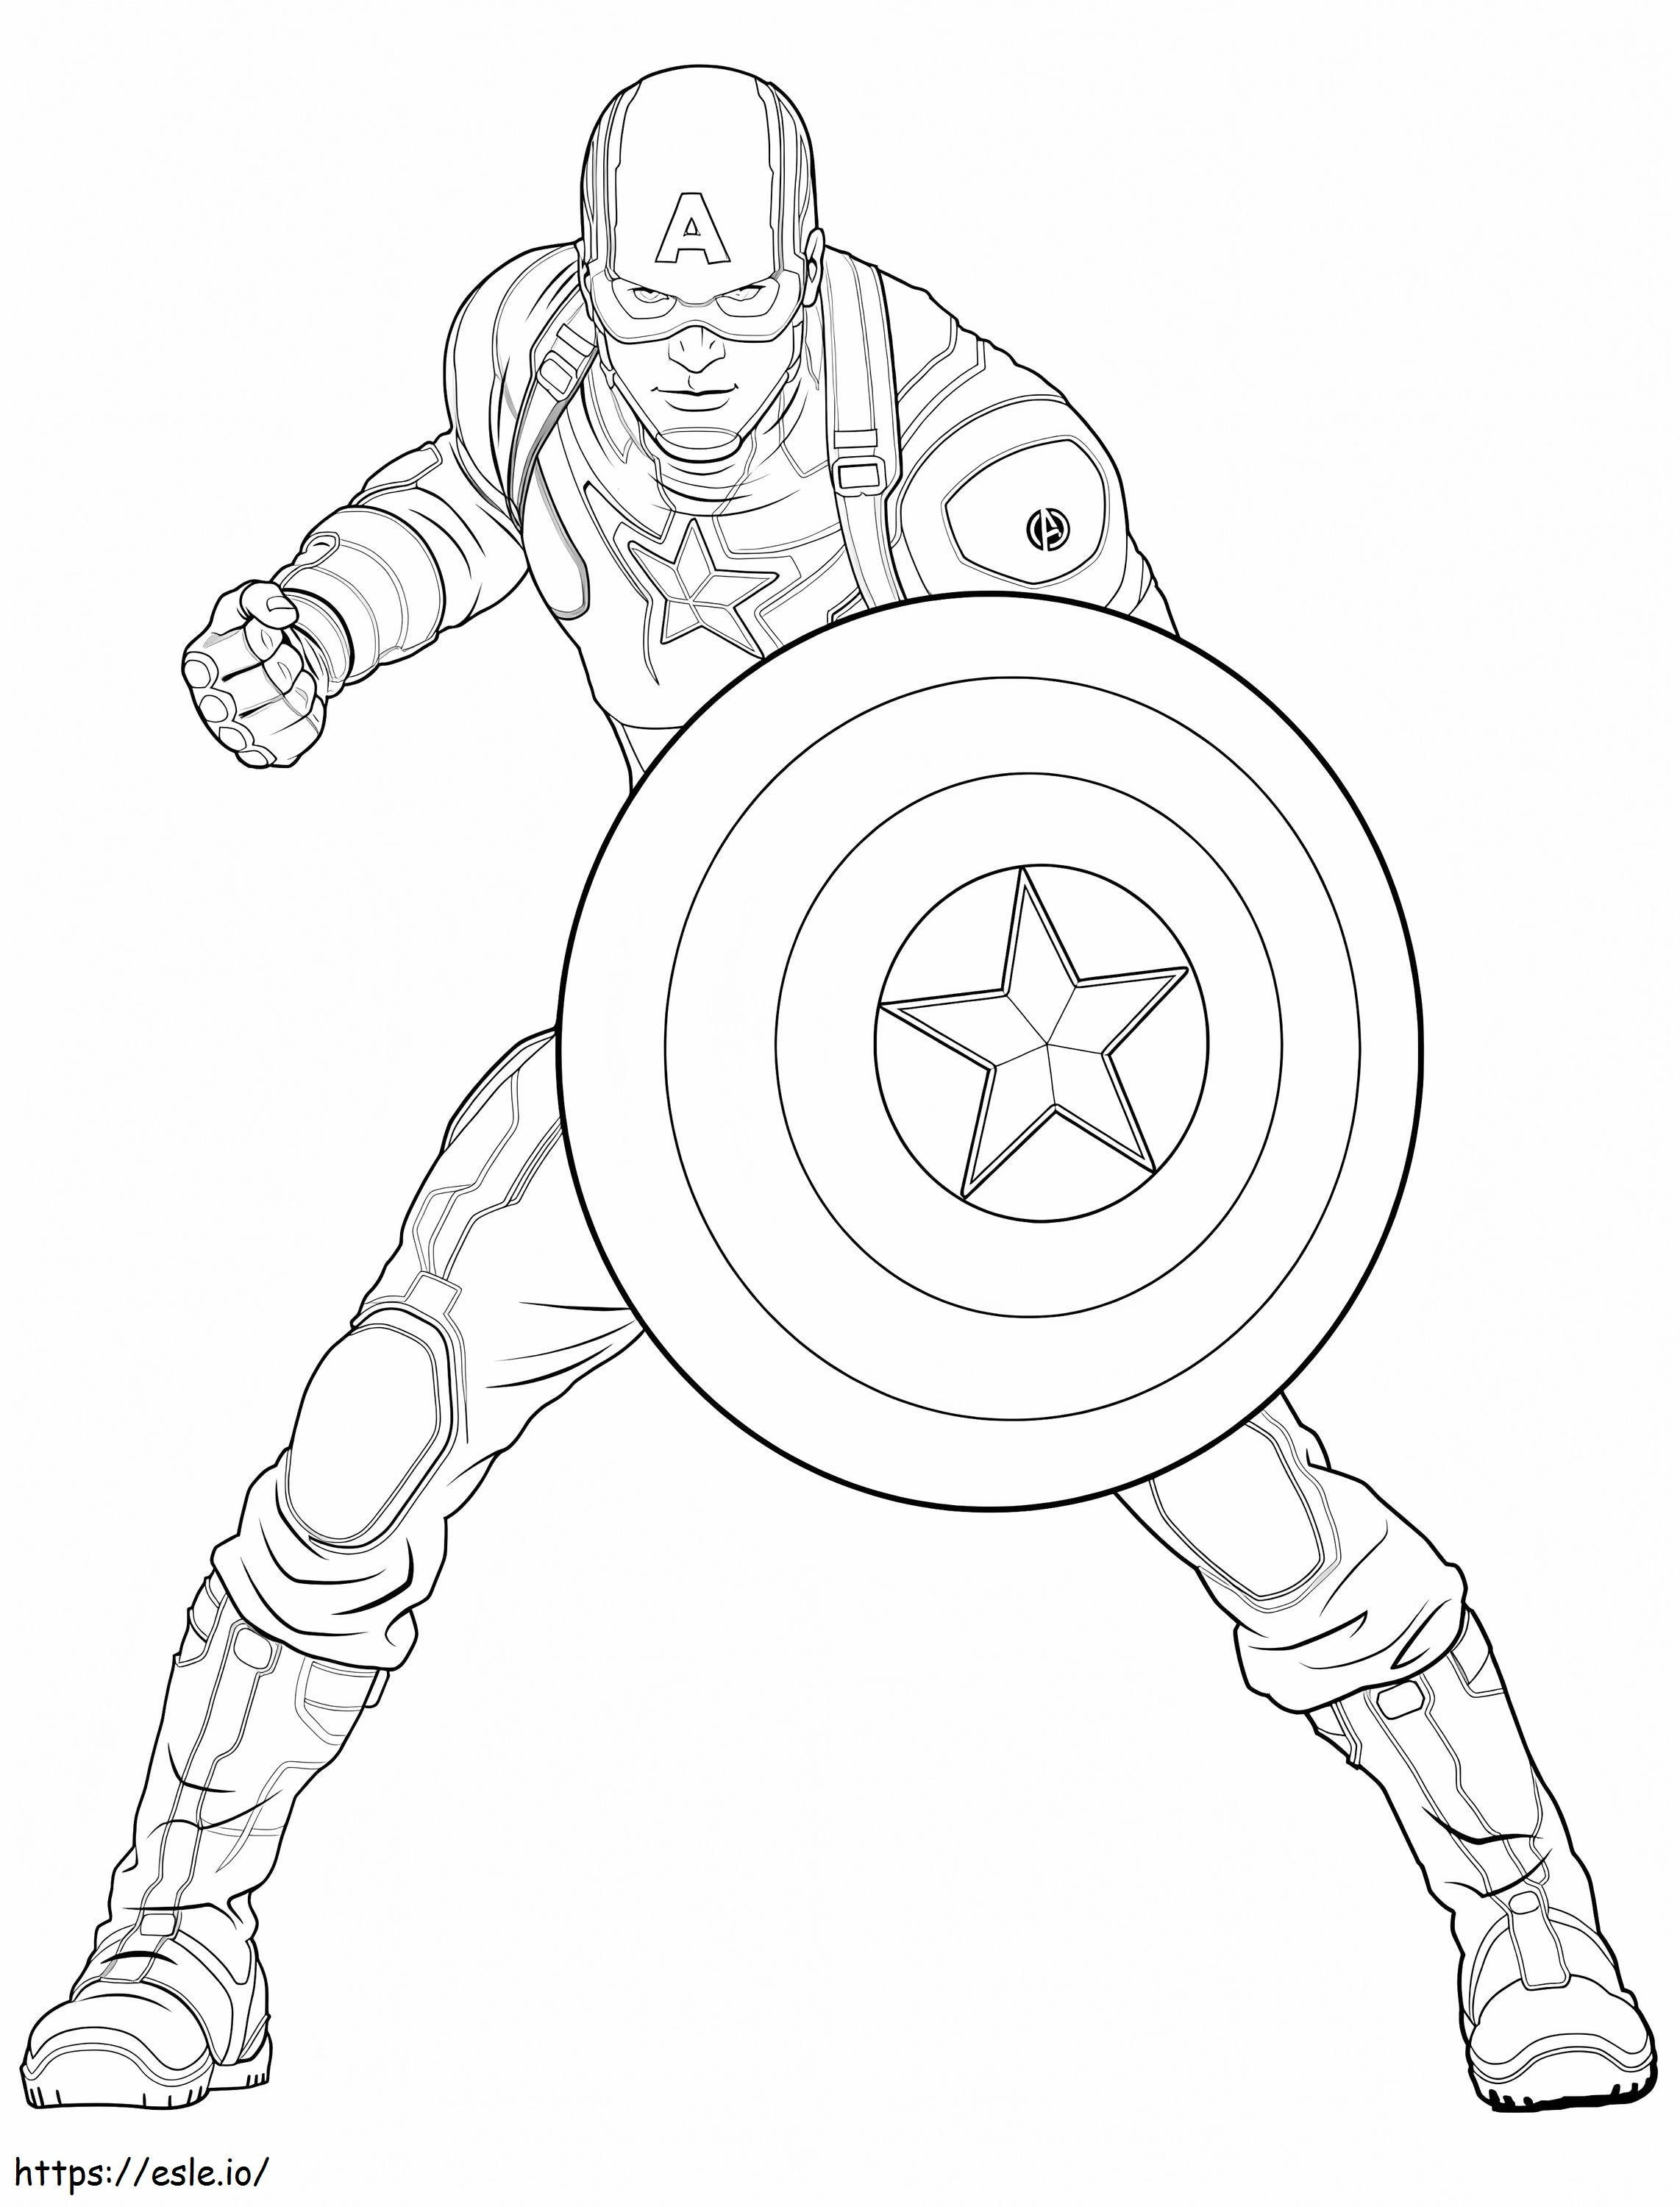 Captain America 4 coloring page